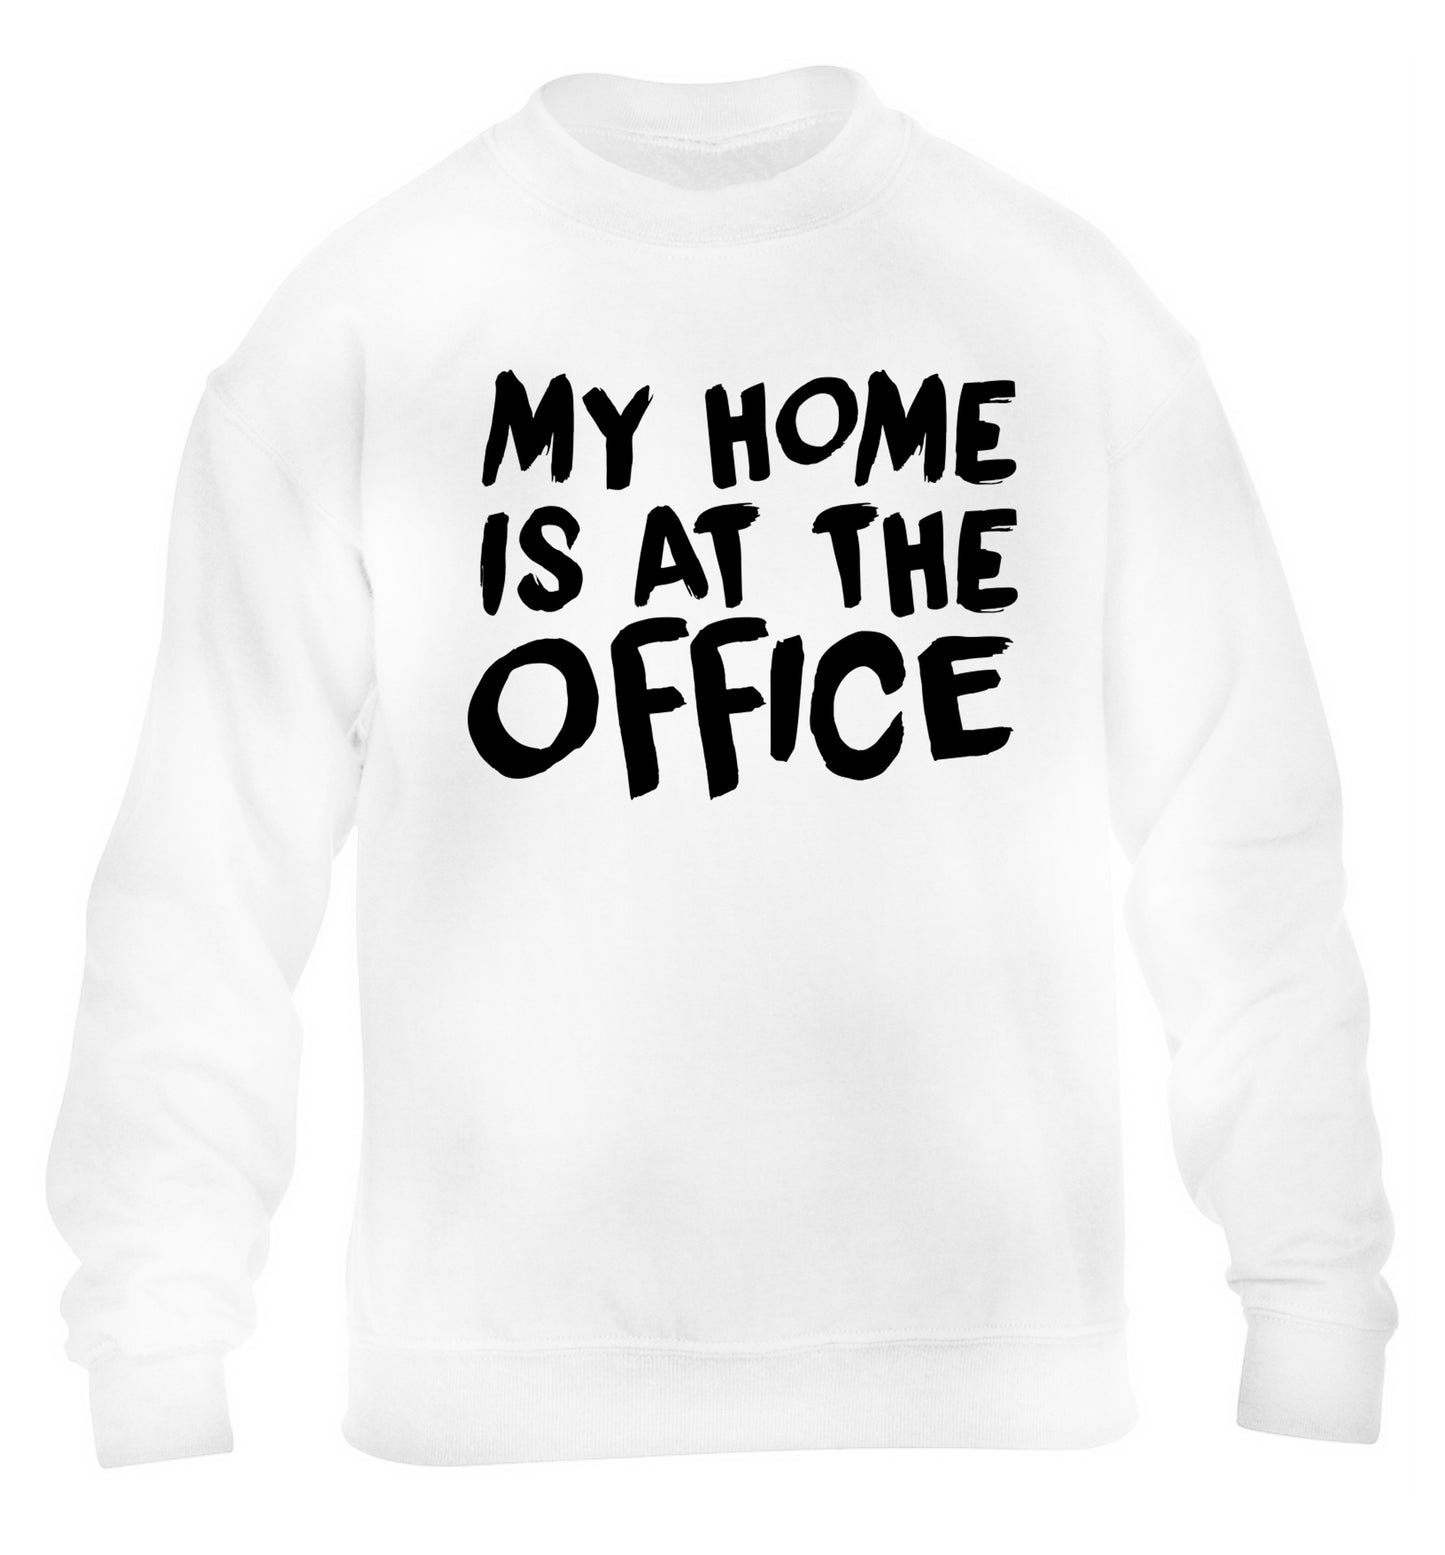 My home is at the office children's white sweater 12-14 Years